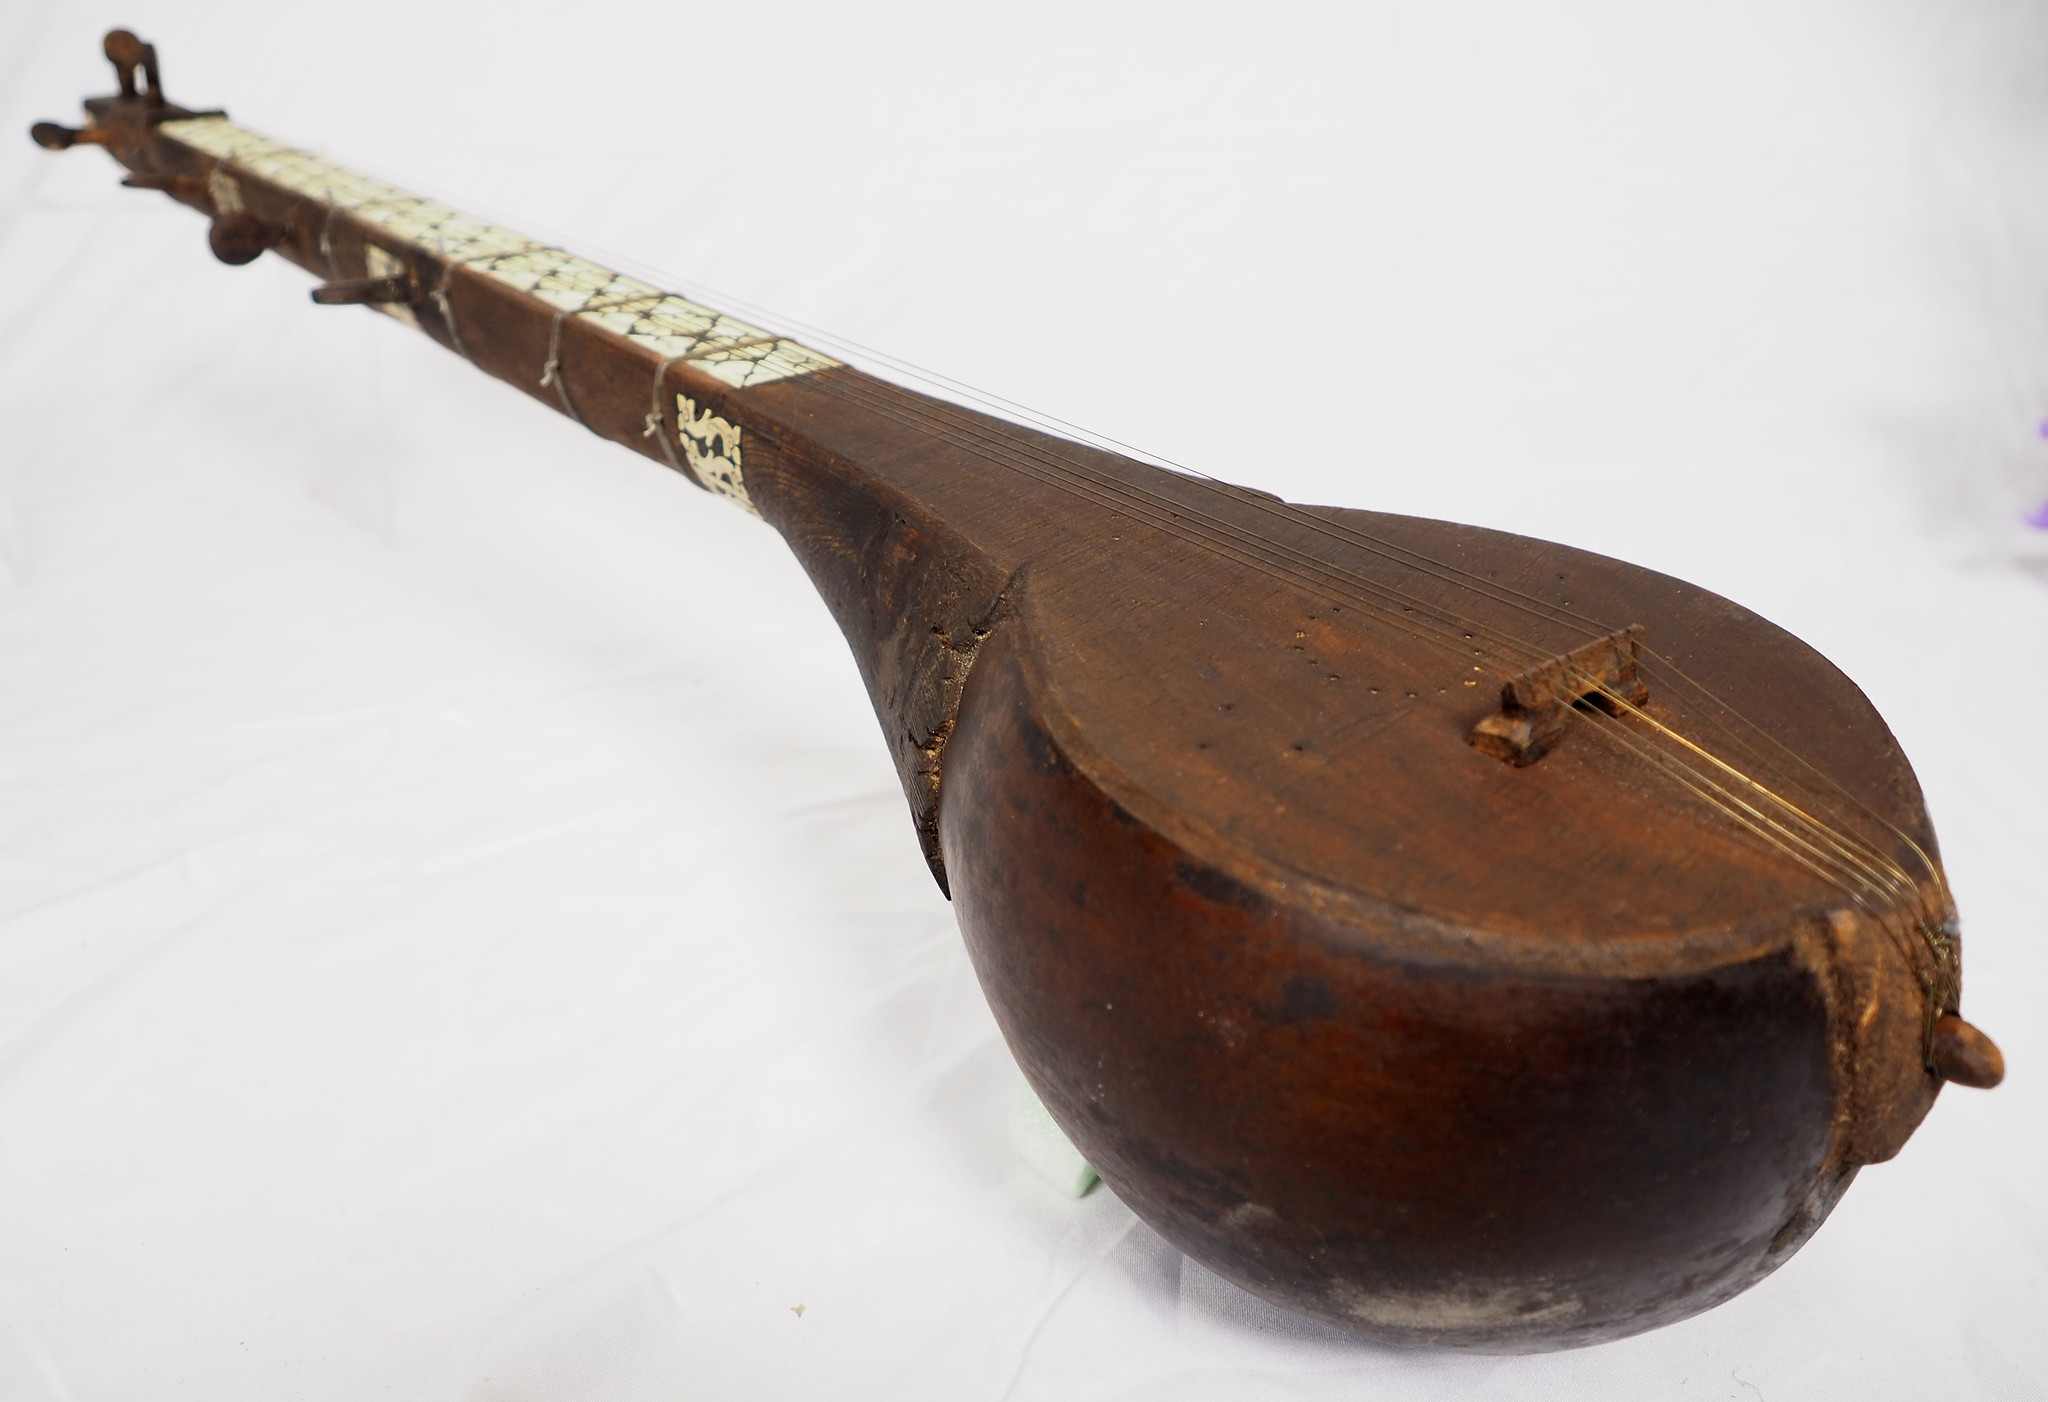 afghanistan musical instruments